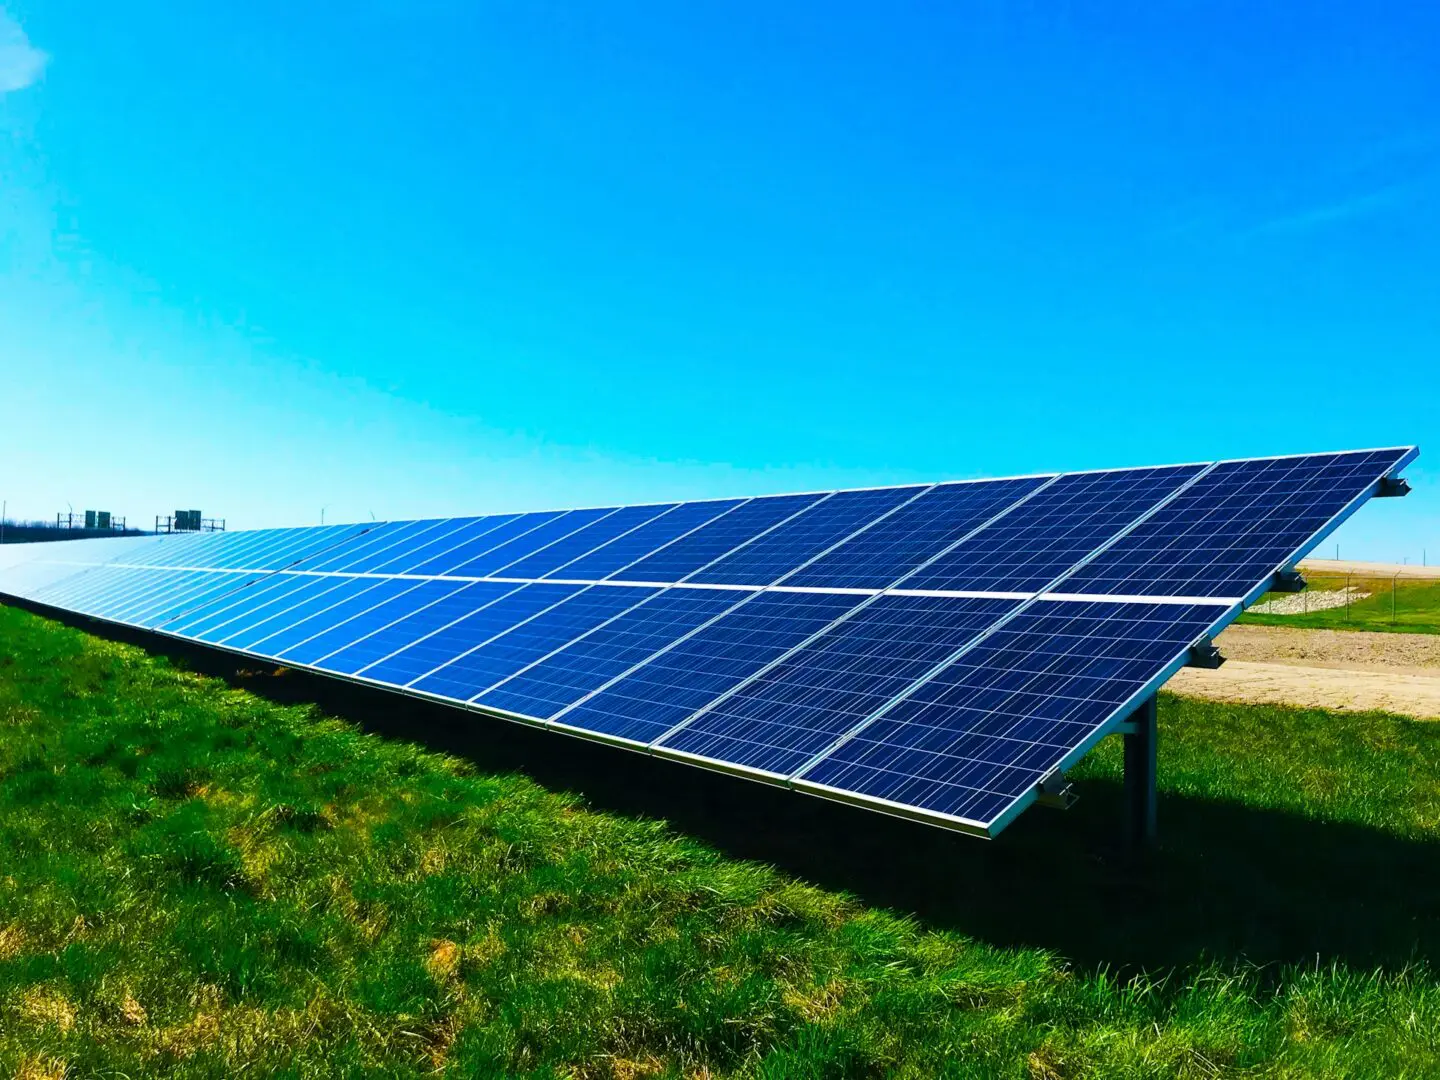 A large solar panel sitting in the middle of a field.